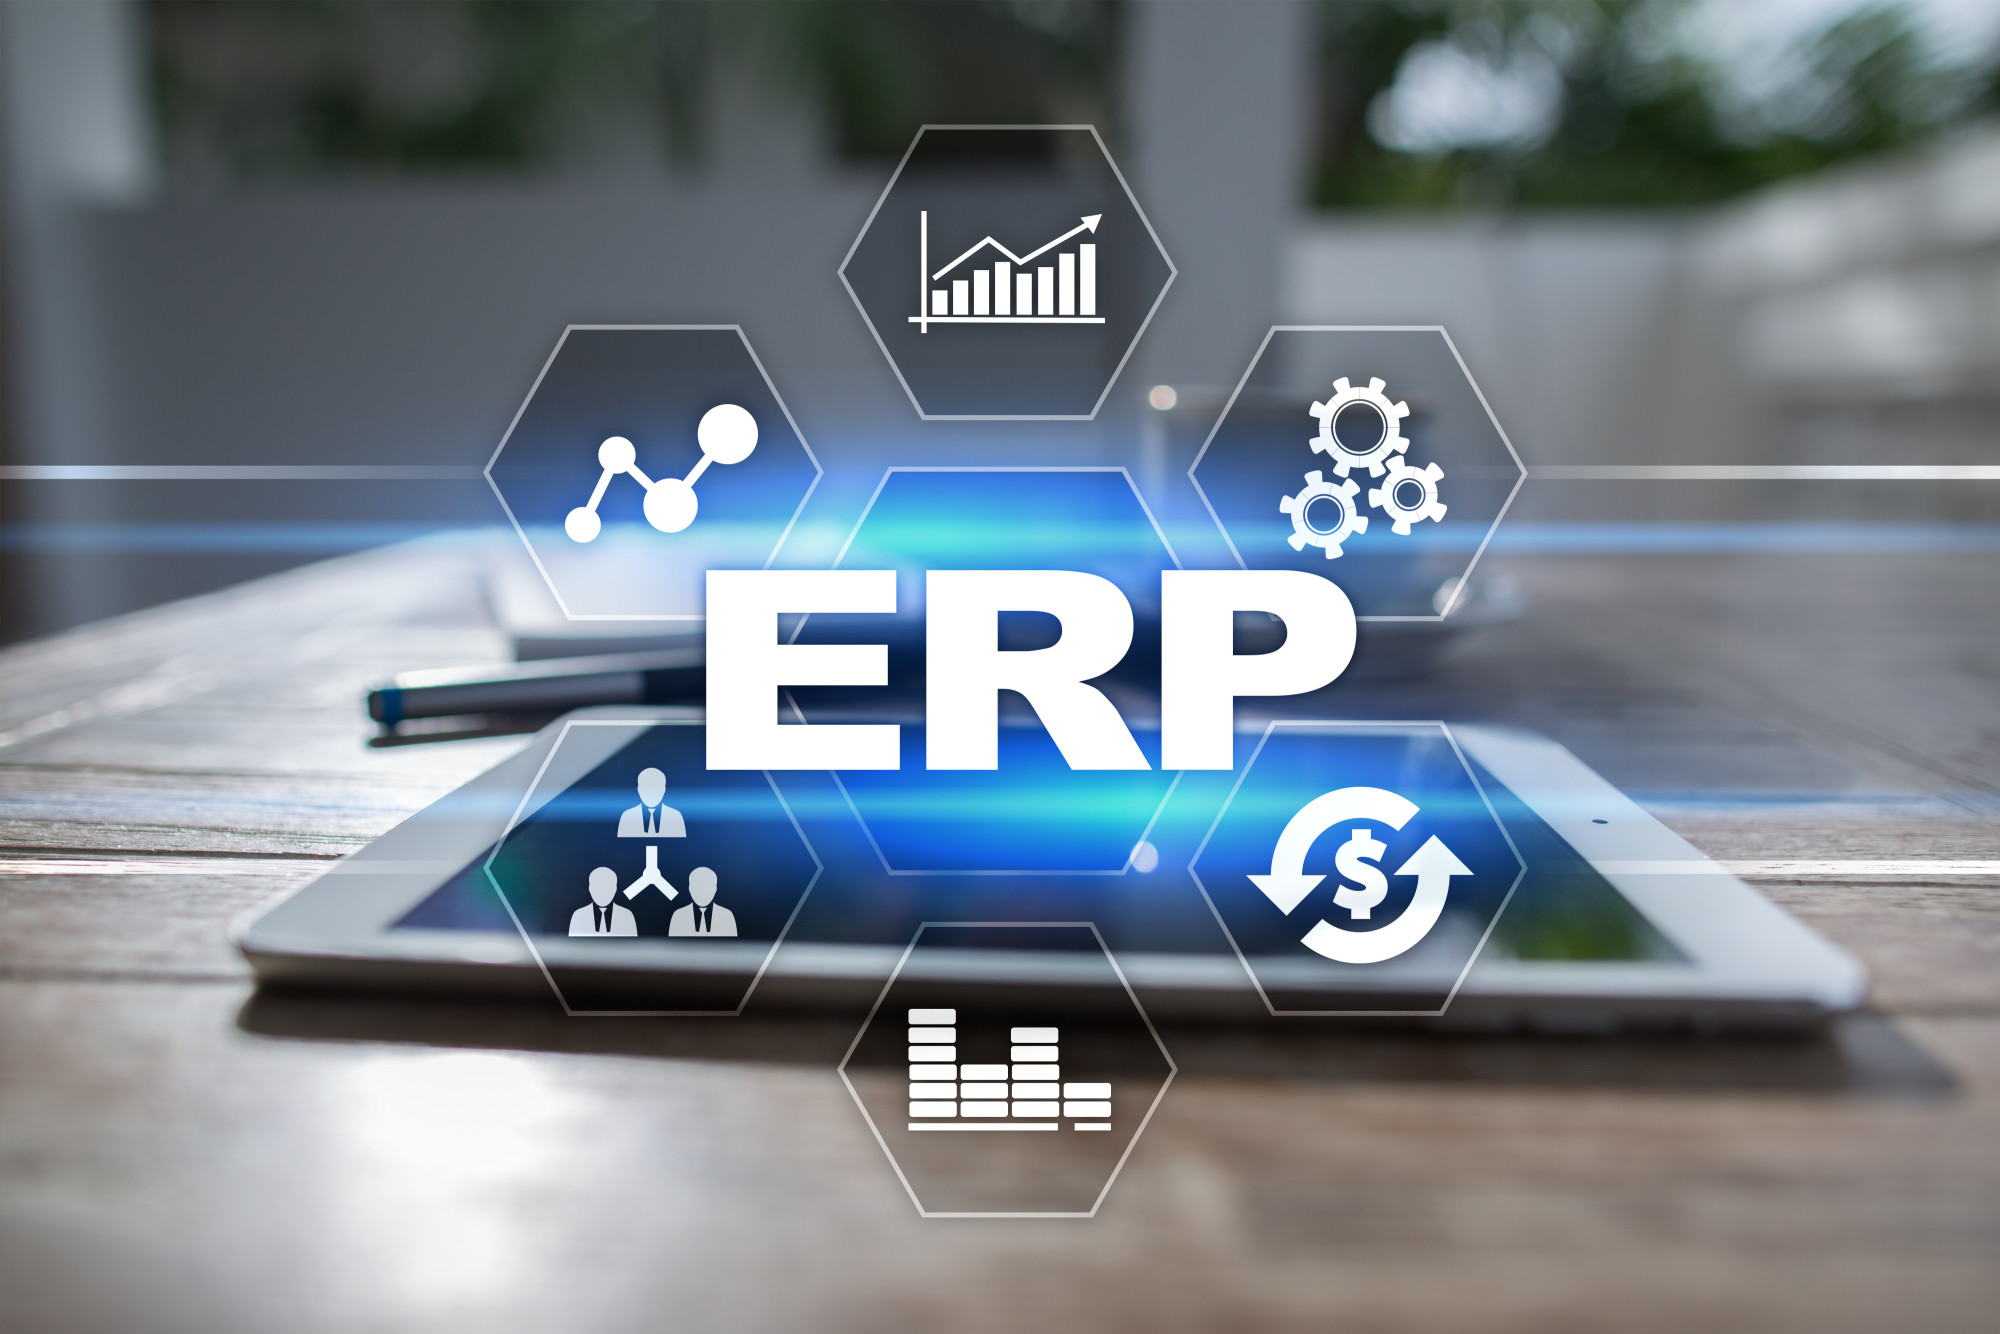 5 Steps for a Successful ERP Implementation